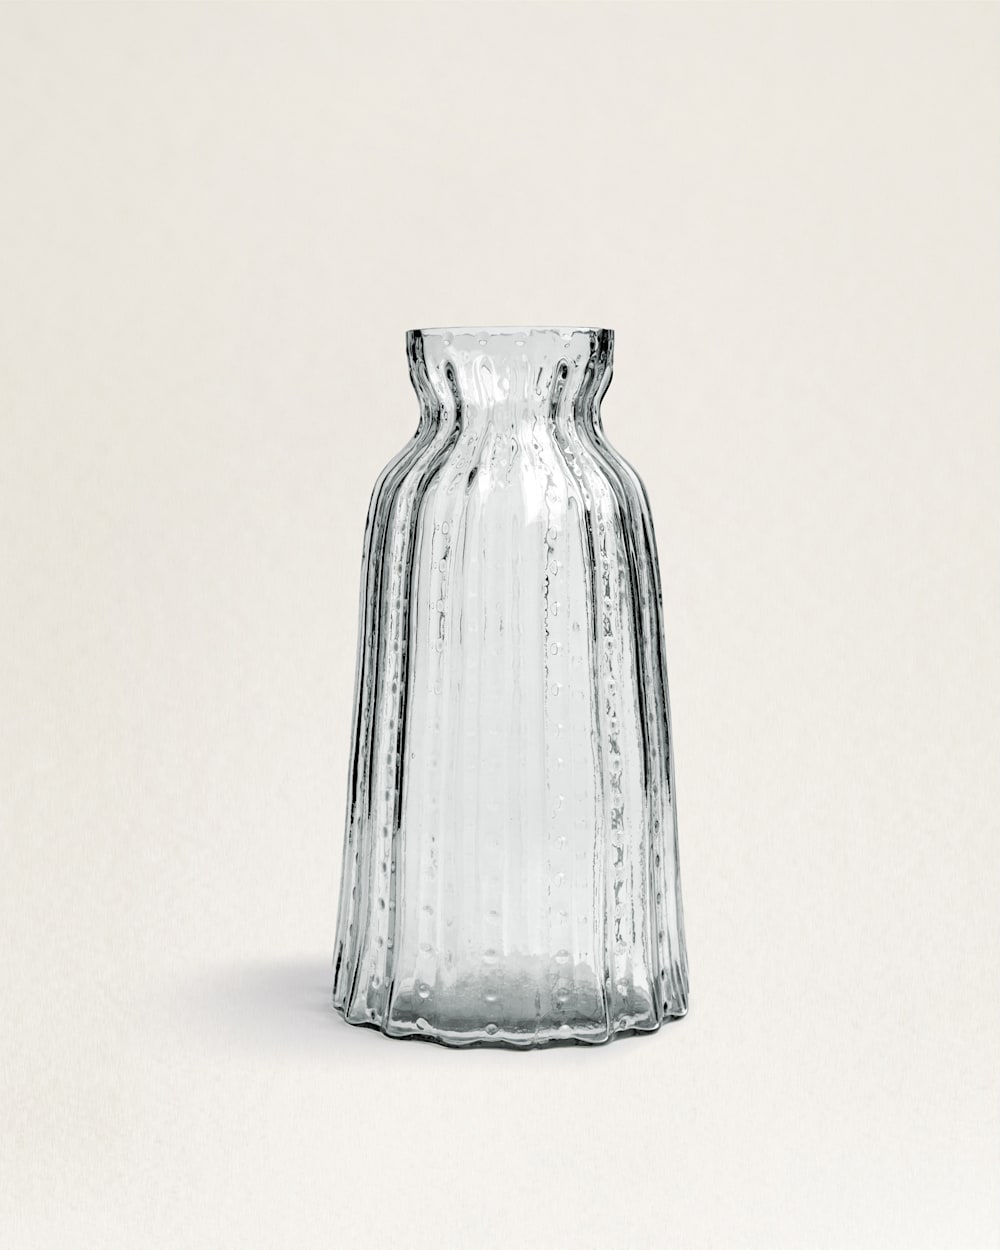 ALTERNATE VIEW OF RUFFLE GLASS & MANGO WOOD CANISTER IN CLEAR image number 6